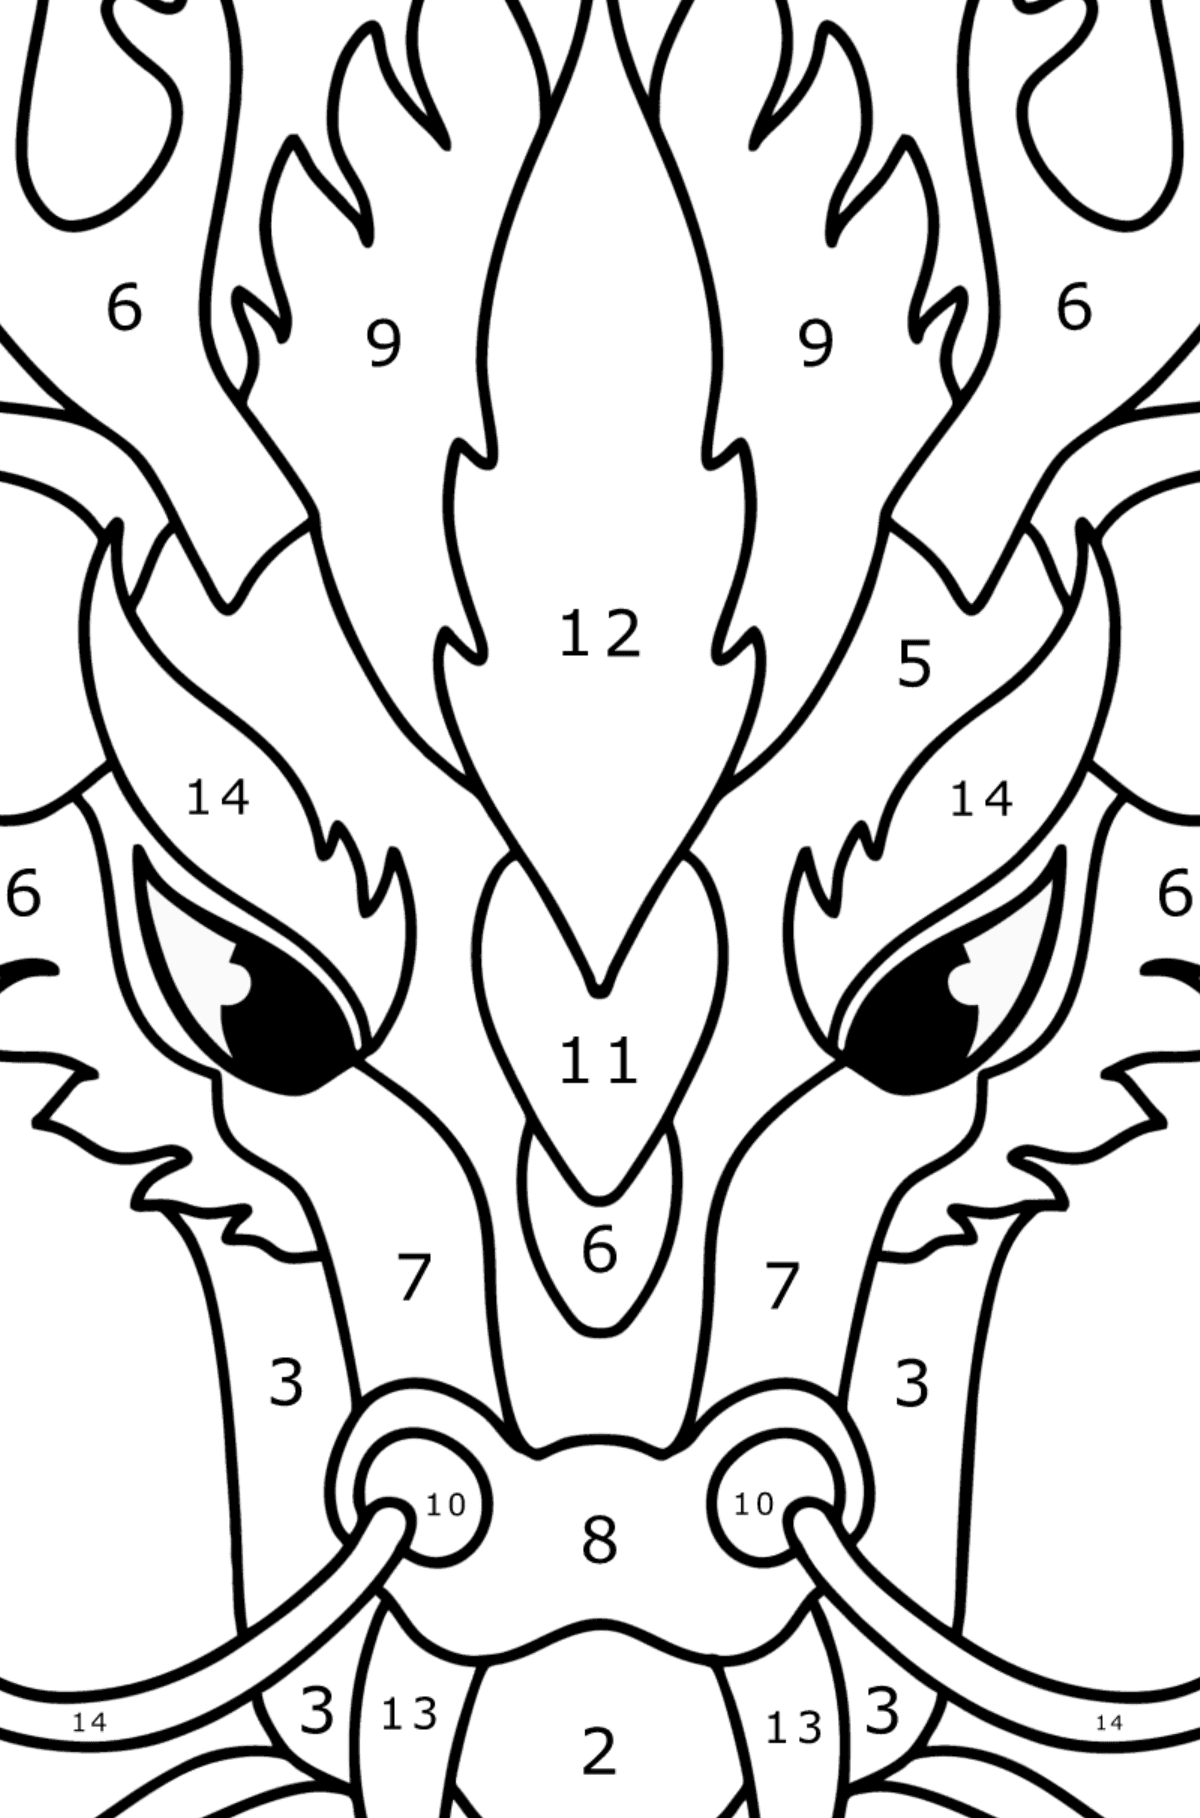 Dragon head coloring page - Coloring by Numbers for Kids